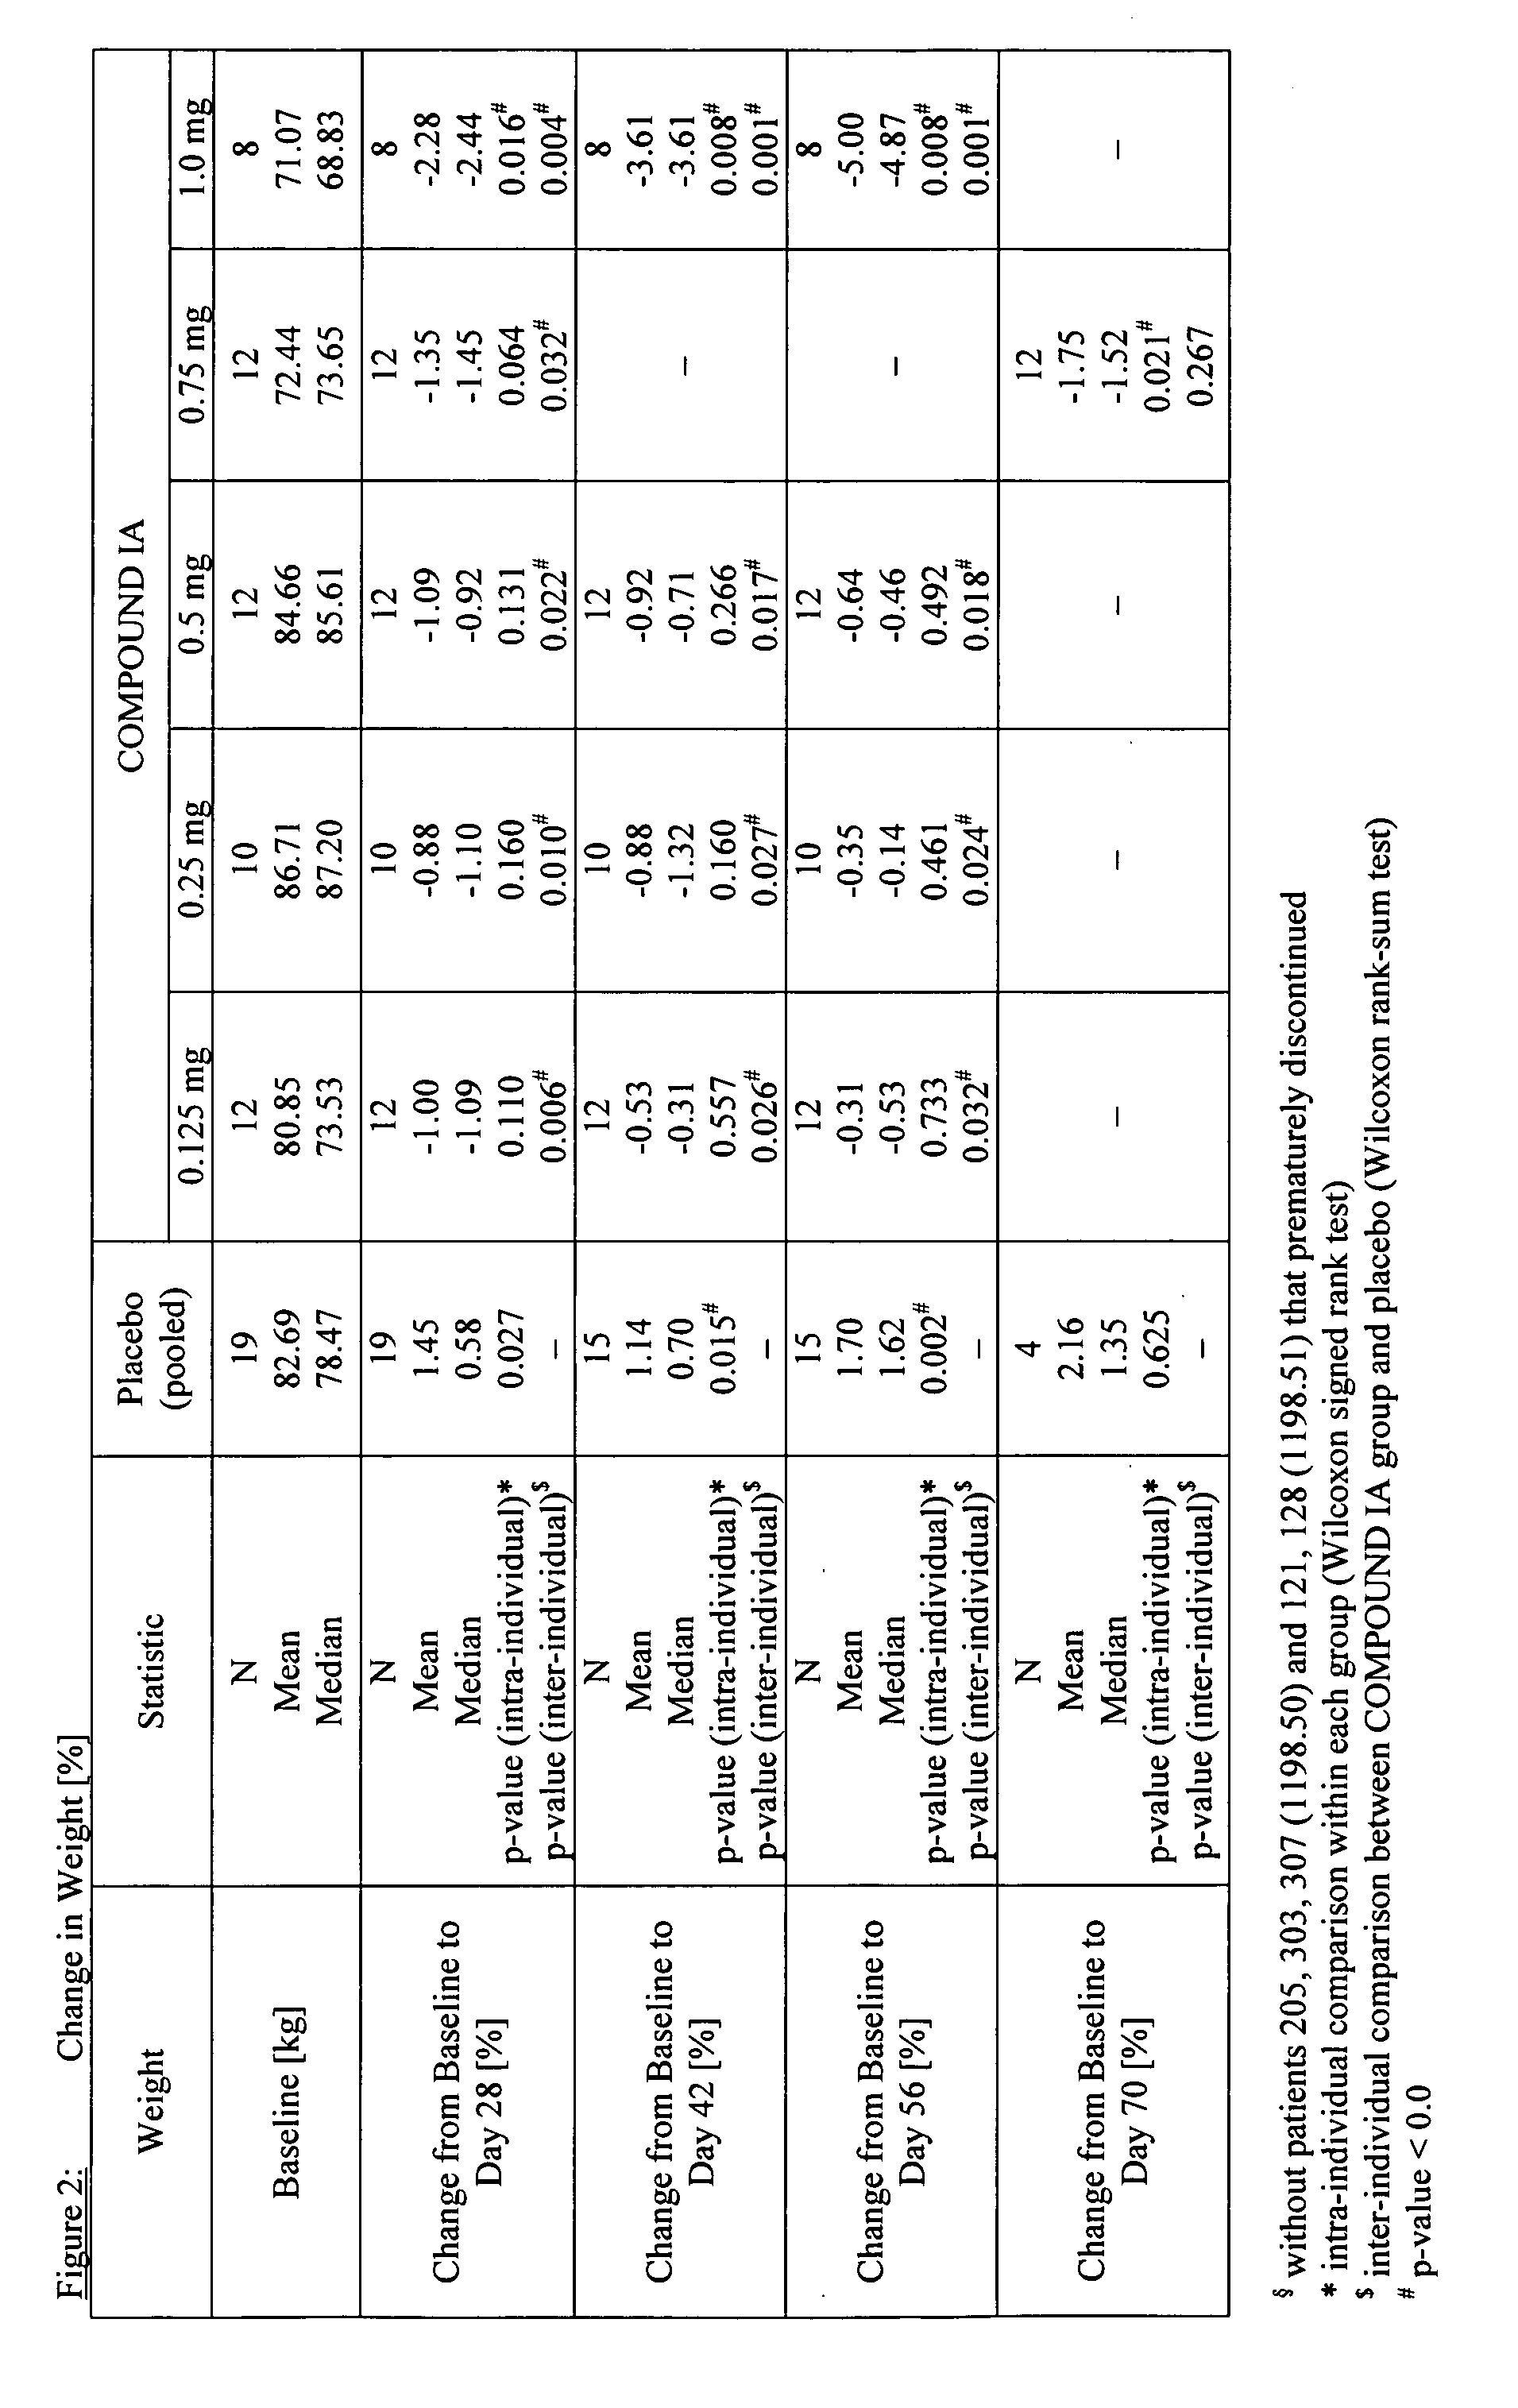 Compounds for the sustained reduction of body weight